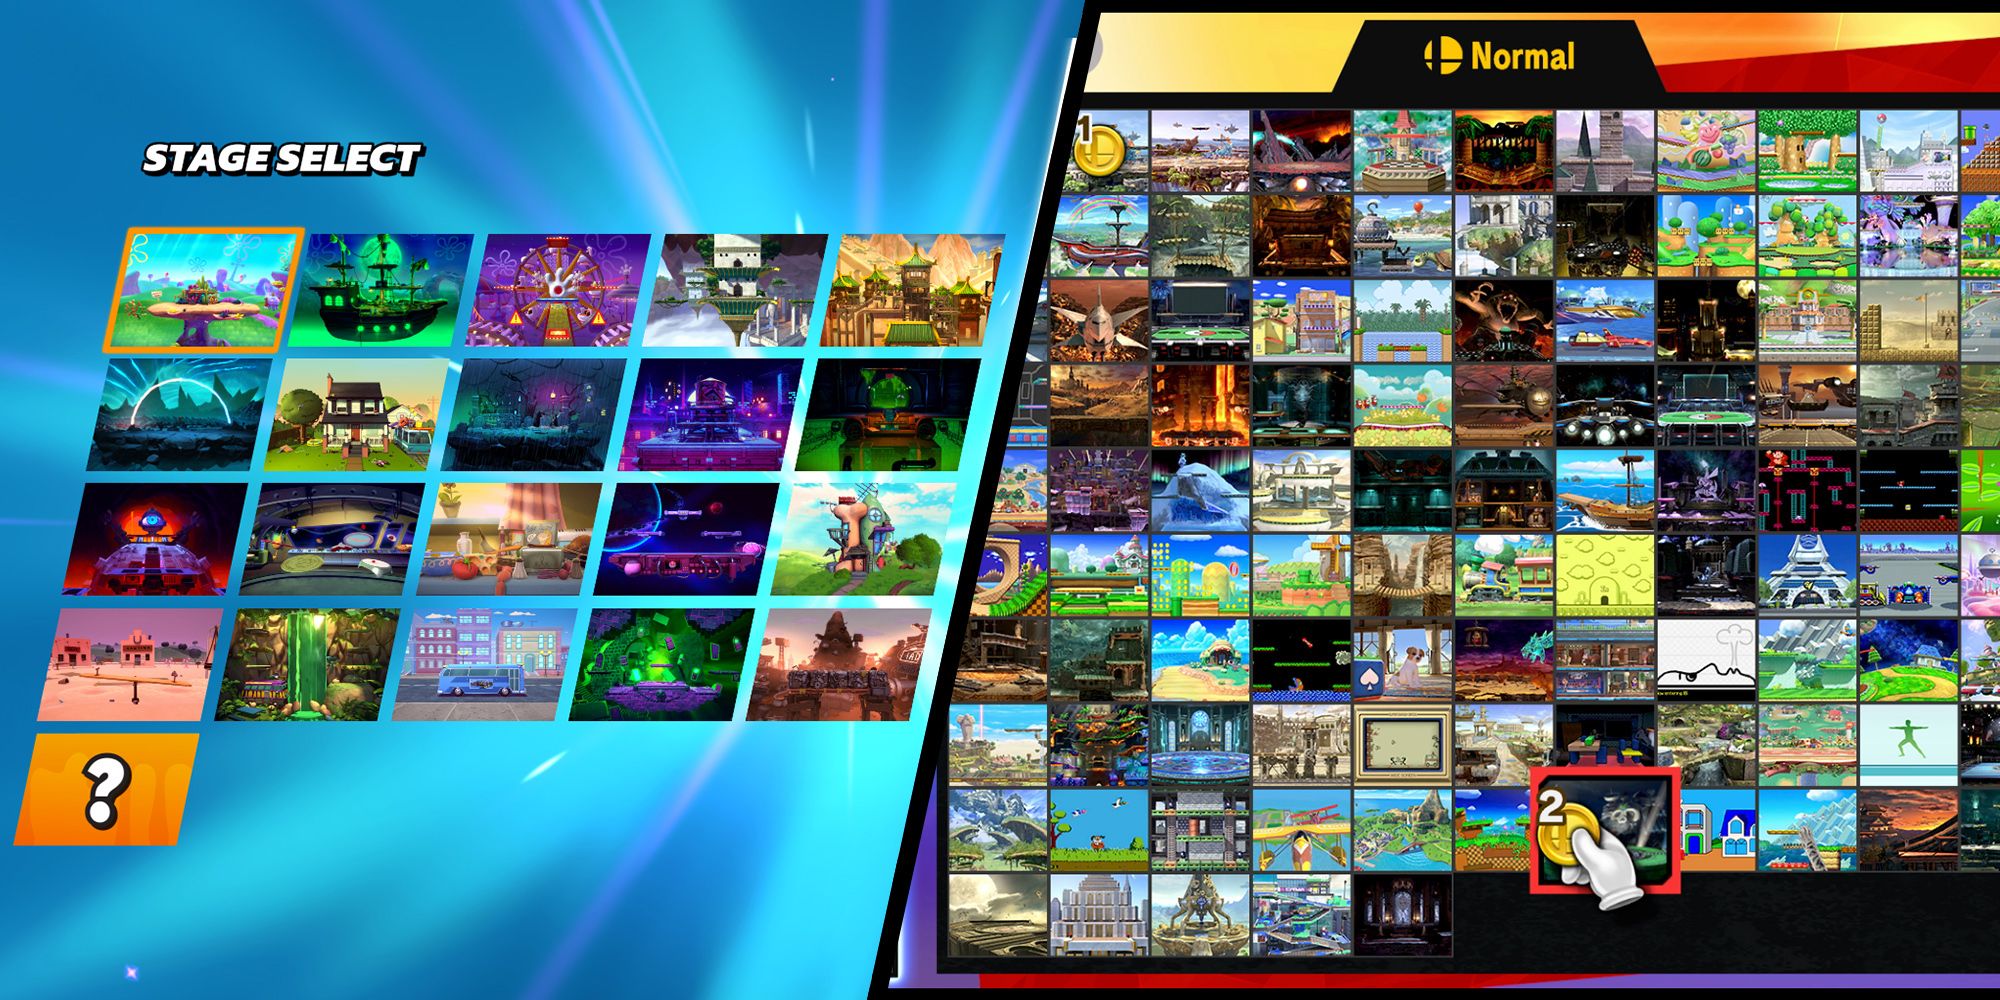 Comparing The Stage Selection Between Nickelodeon All-Star Brawl And Smash Ultimate